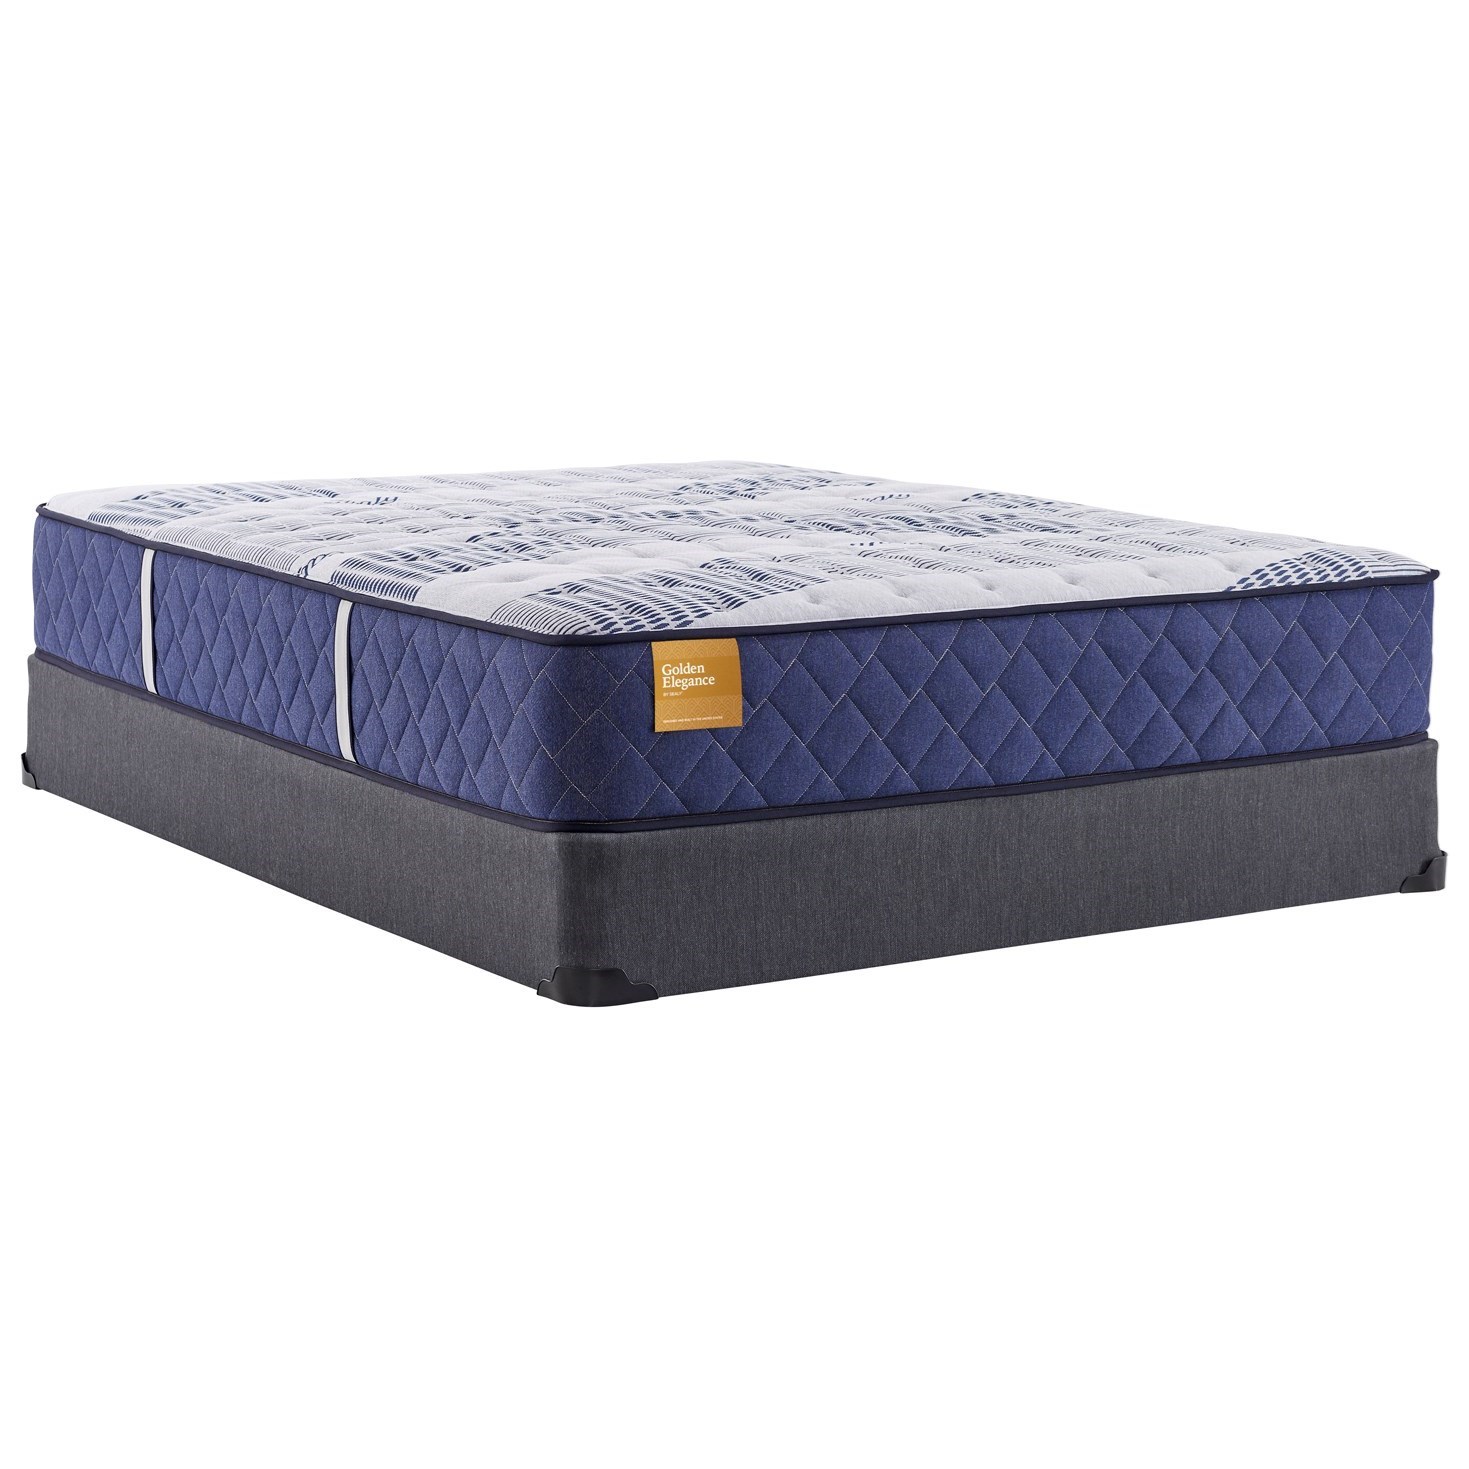 Full 12 1/2" Cushion Firm Encased Coil Mattress and 9" High Profile Foundation